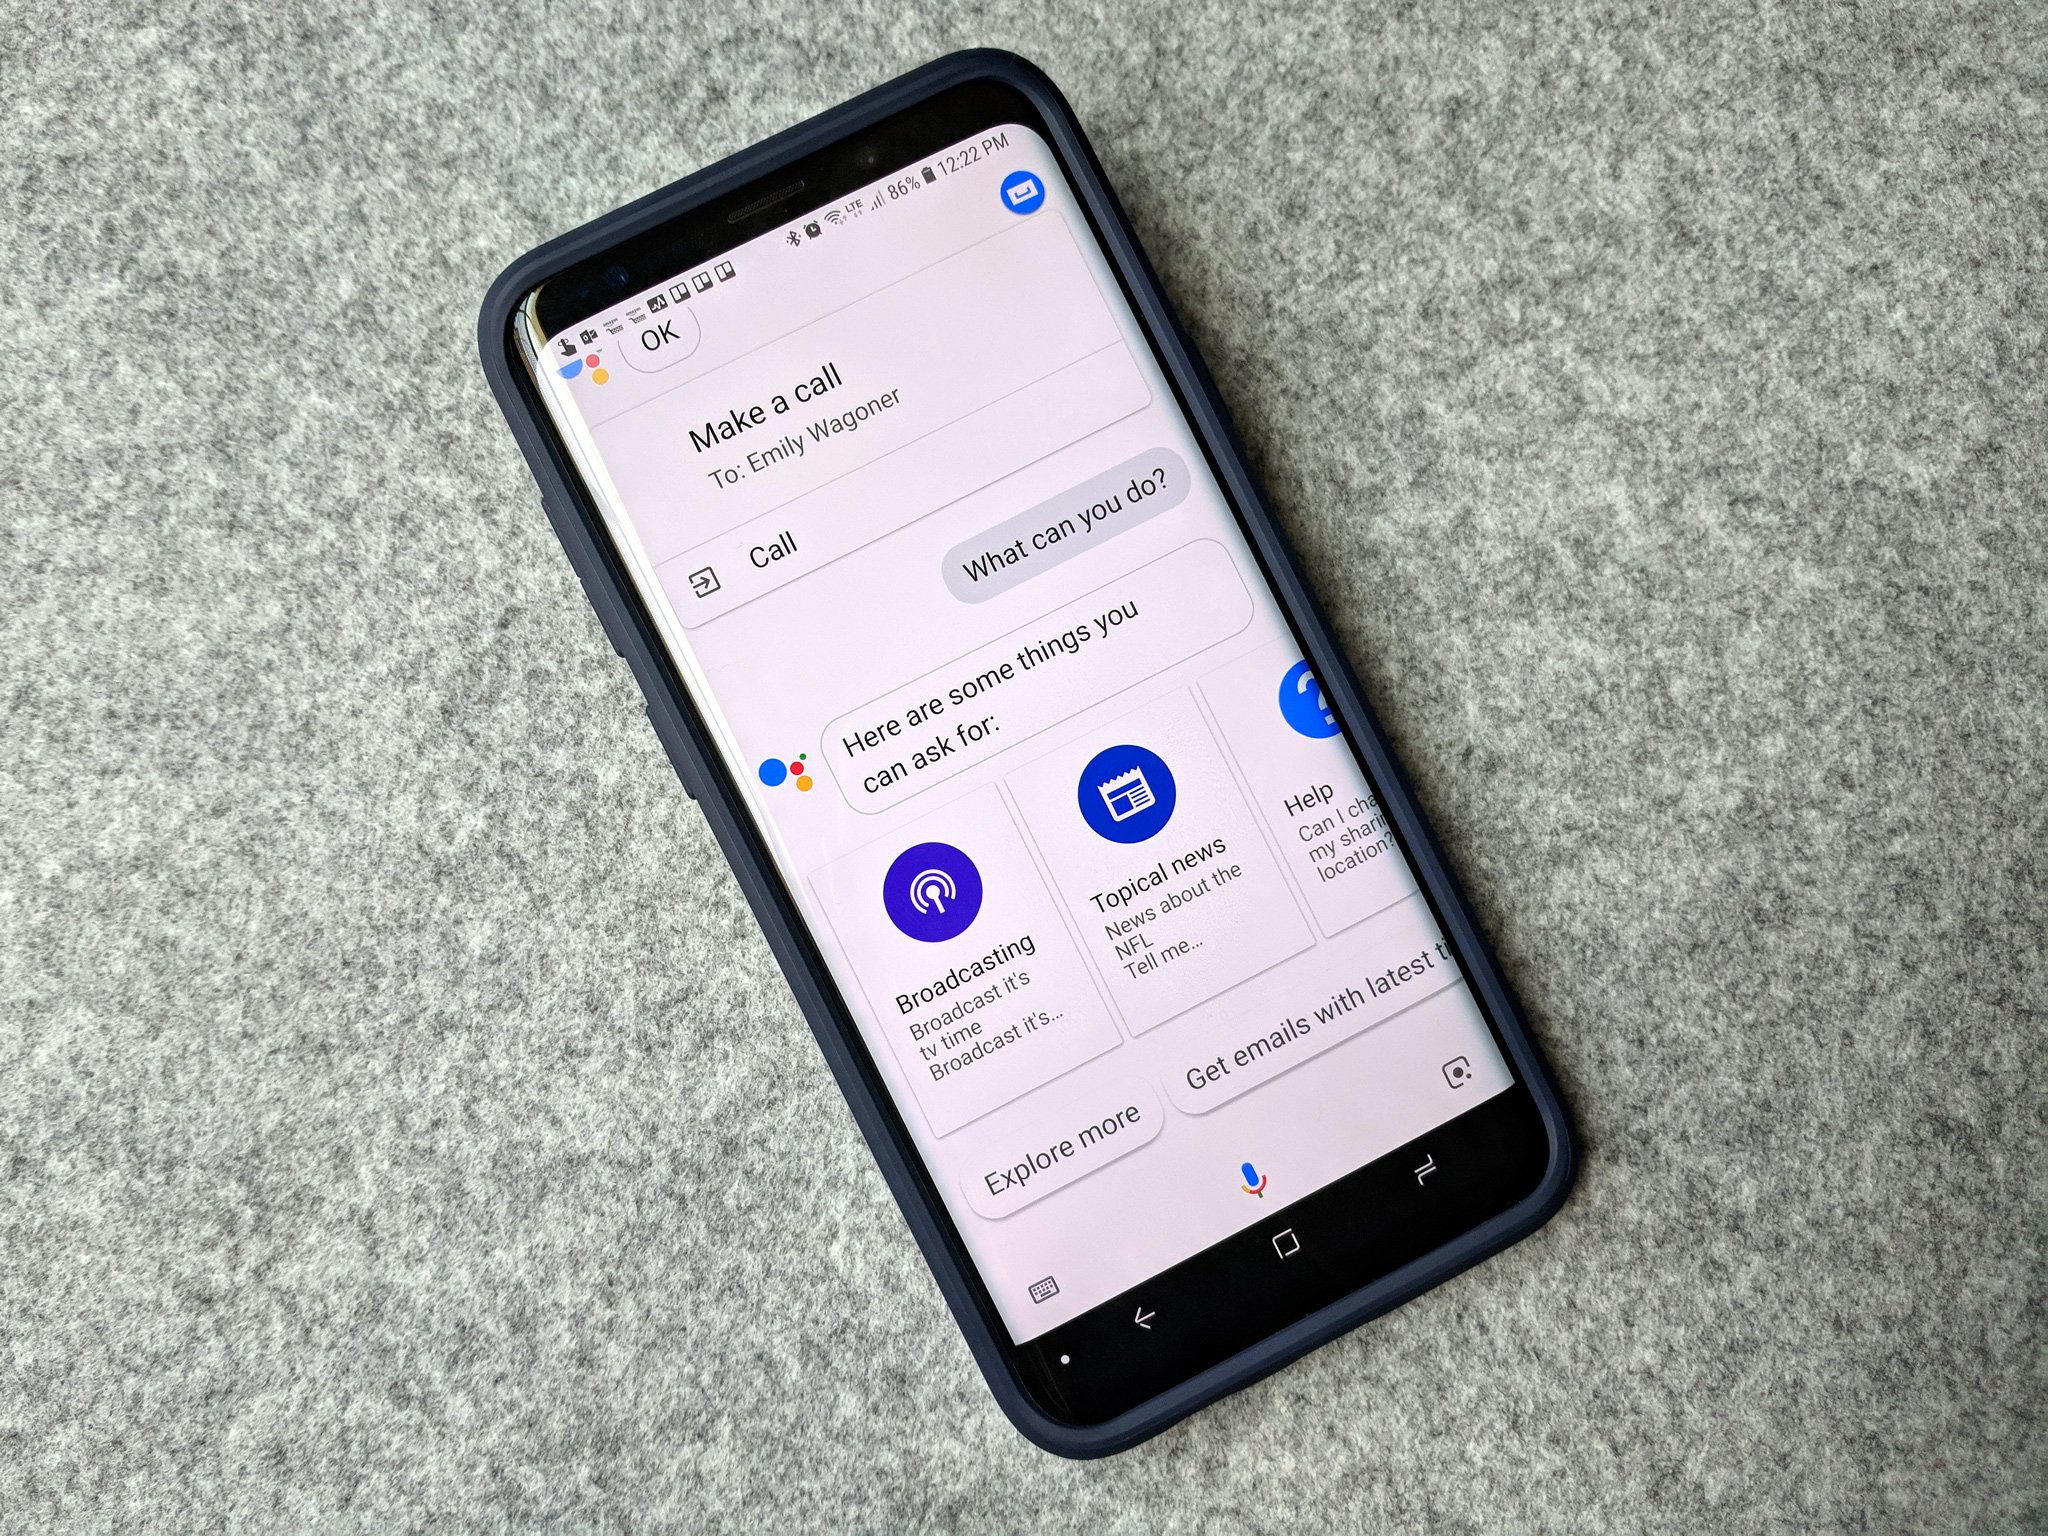 A phone showing a Google Assistant menu, with options for some commands you can make